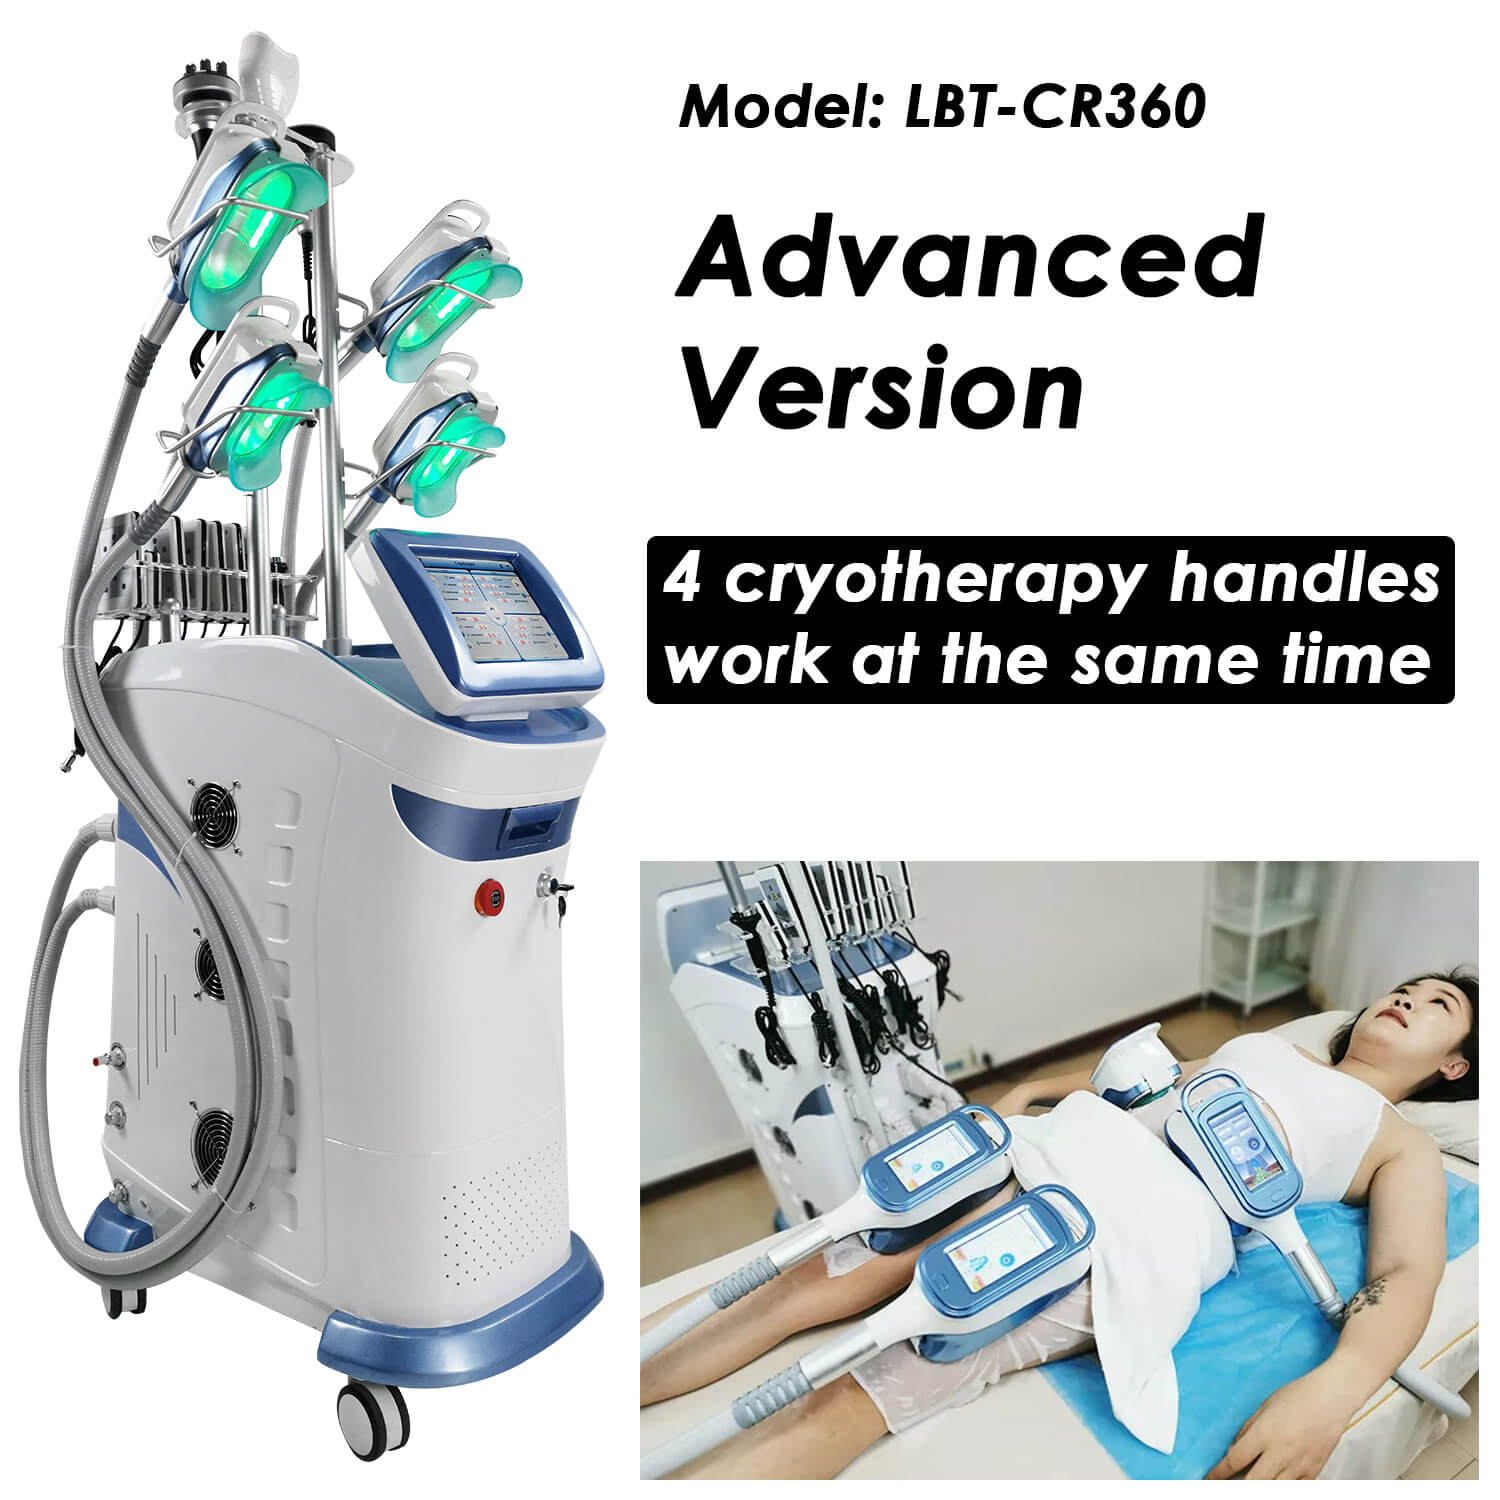 Cryo slimming machine has 4 cooling handles that can work together